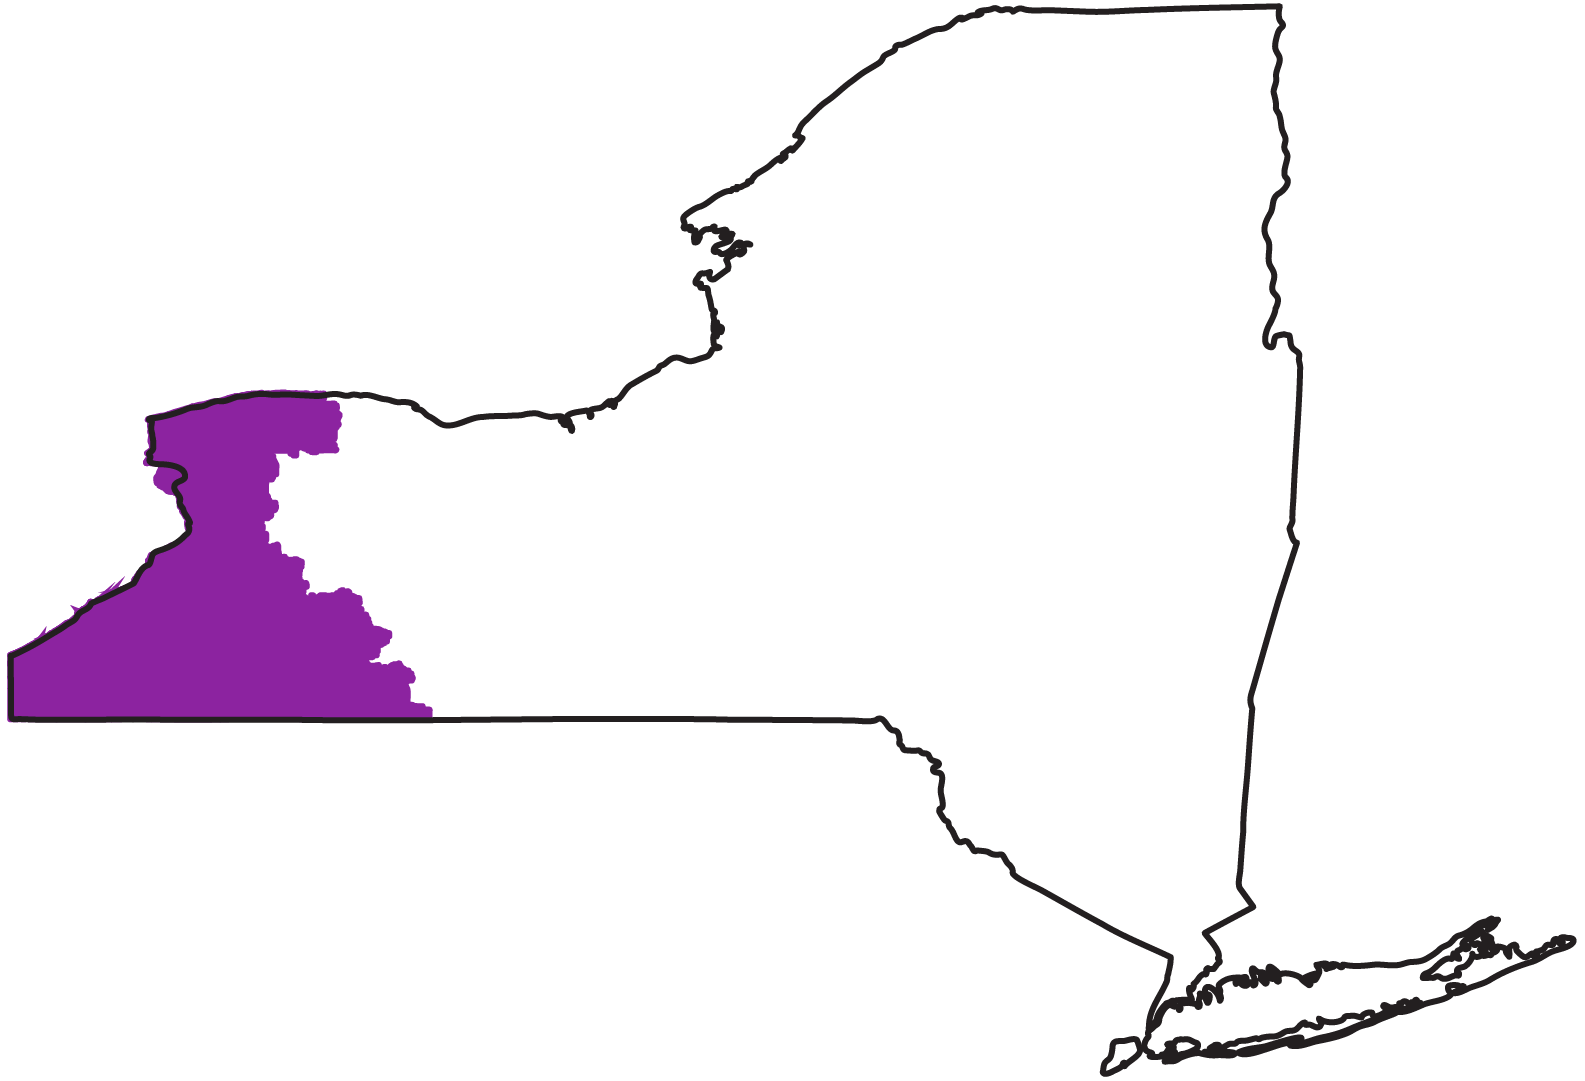 New York State map highlighting the West region